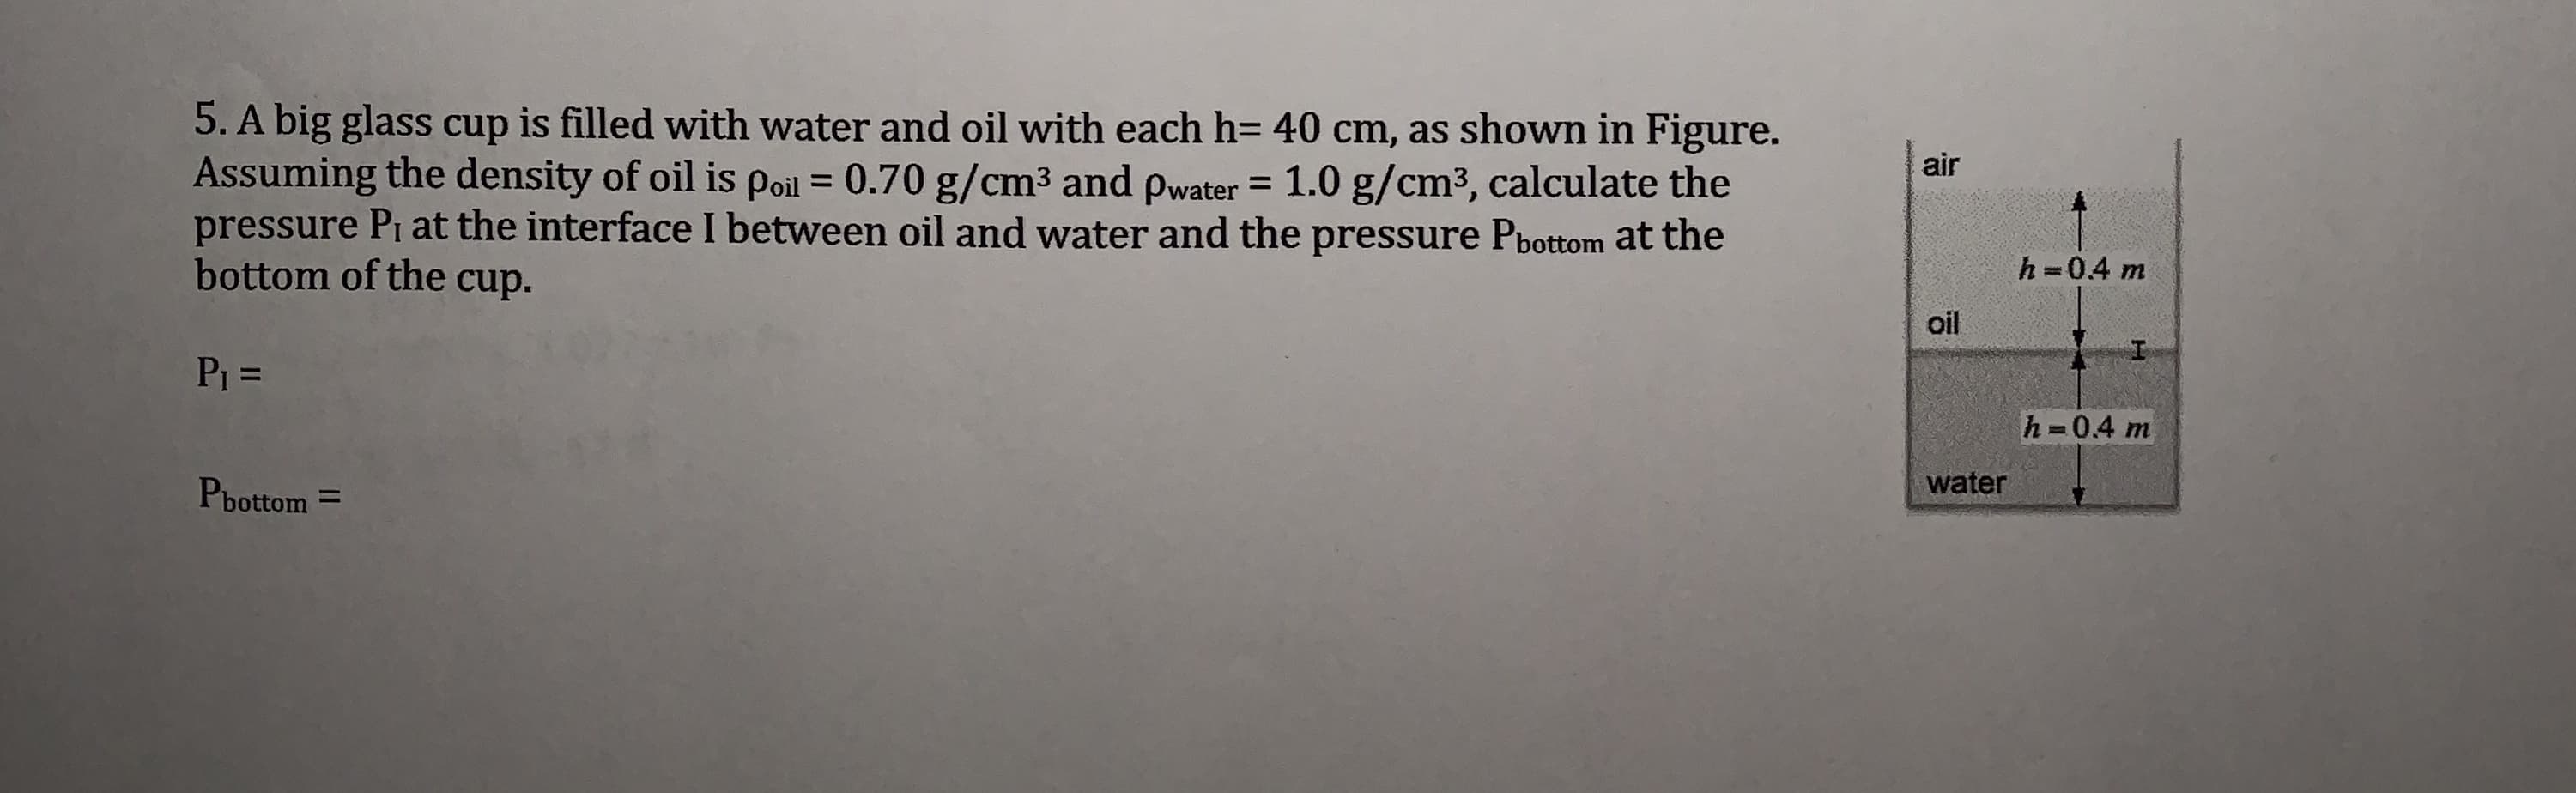 5. A big glass cup is filled with water and oil with each h= 40 cm, as shown in Figure.
Assuming the density of oil is poil = 0.70 g/cm3 and pwater = 1.0 g/cm3, calculate the
pressure Pi at the interface I between oil and water and the pressure Pbottom at the
bottom of the cup.
air
h =0.4 m
oil
P1 D
h 0.4 m
Pbottom =
water
%3D
